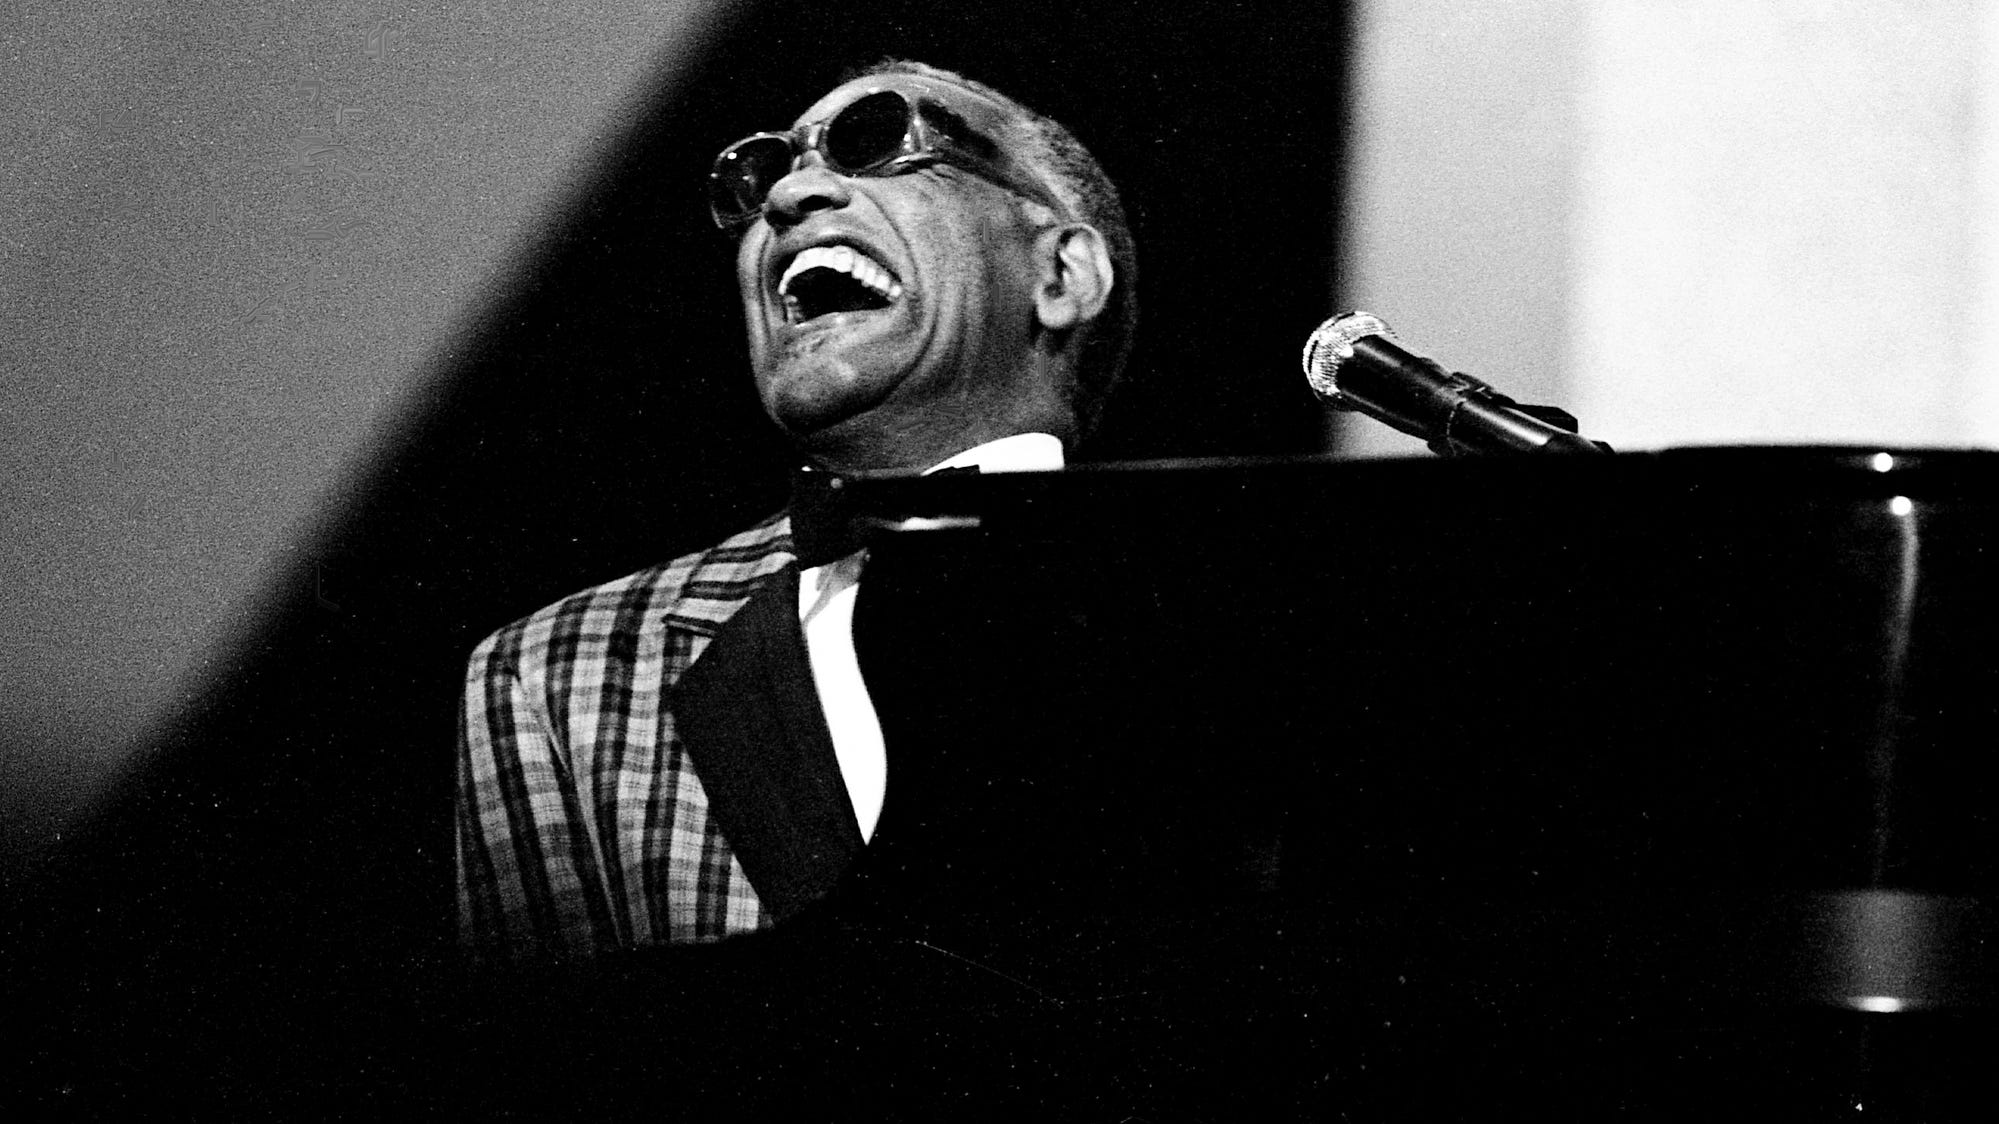 Country Music Hall of Fame 2021 inductees include Ray Charles, The Judds